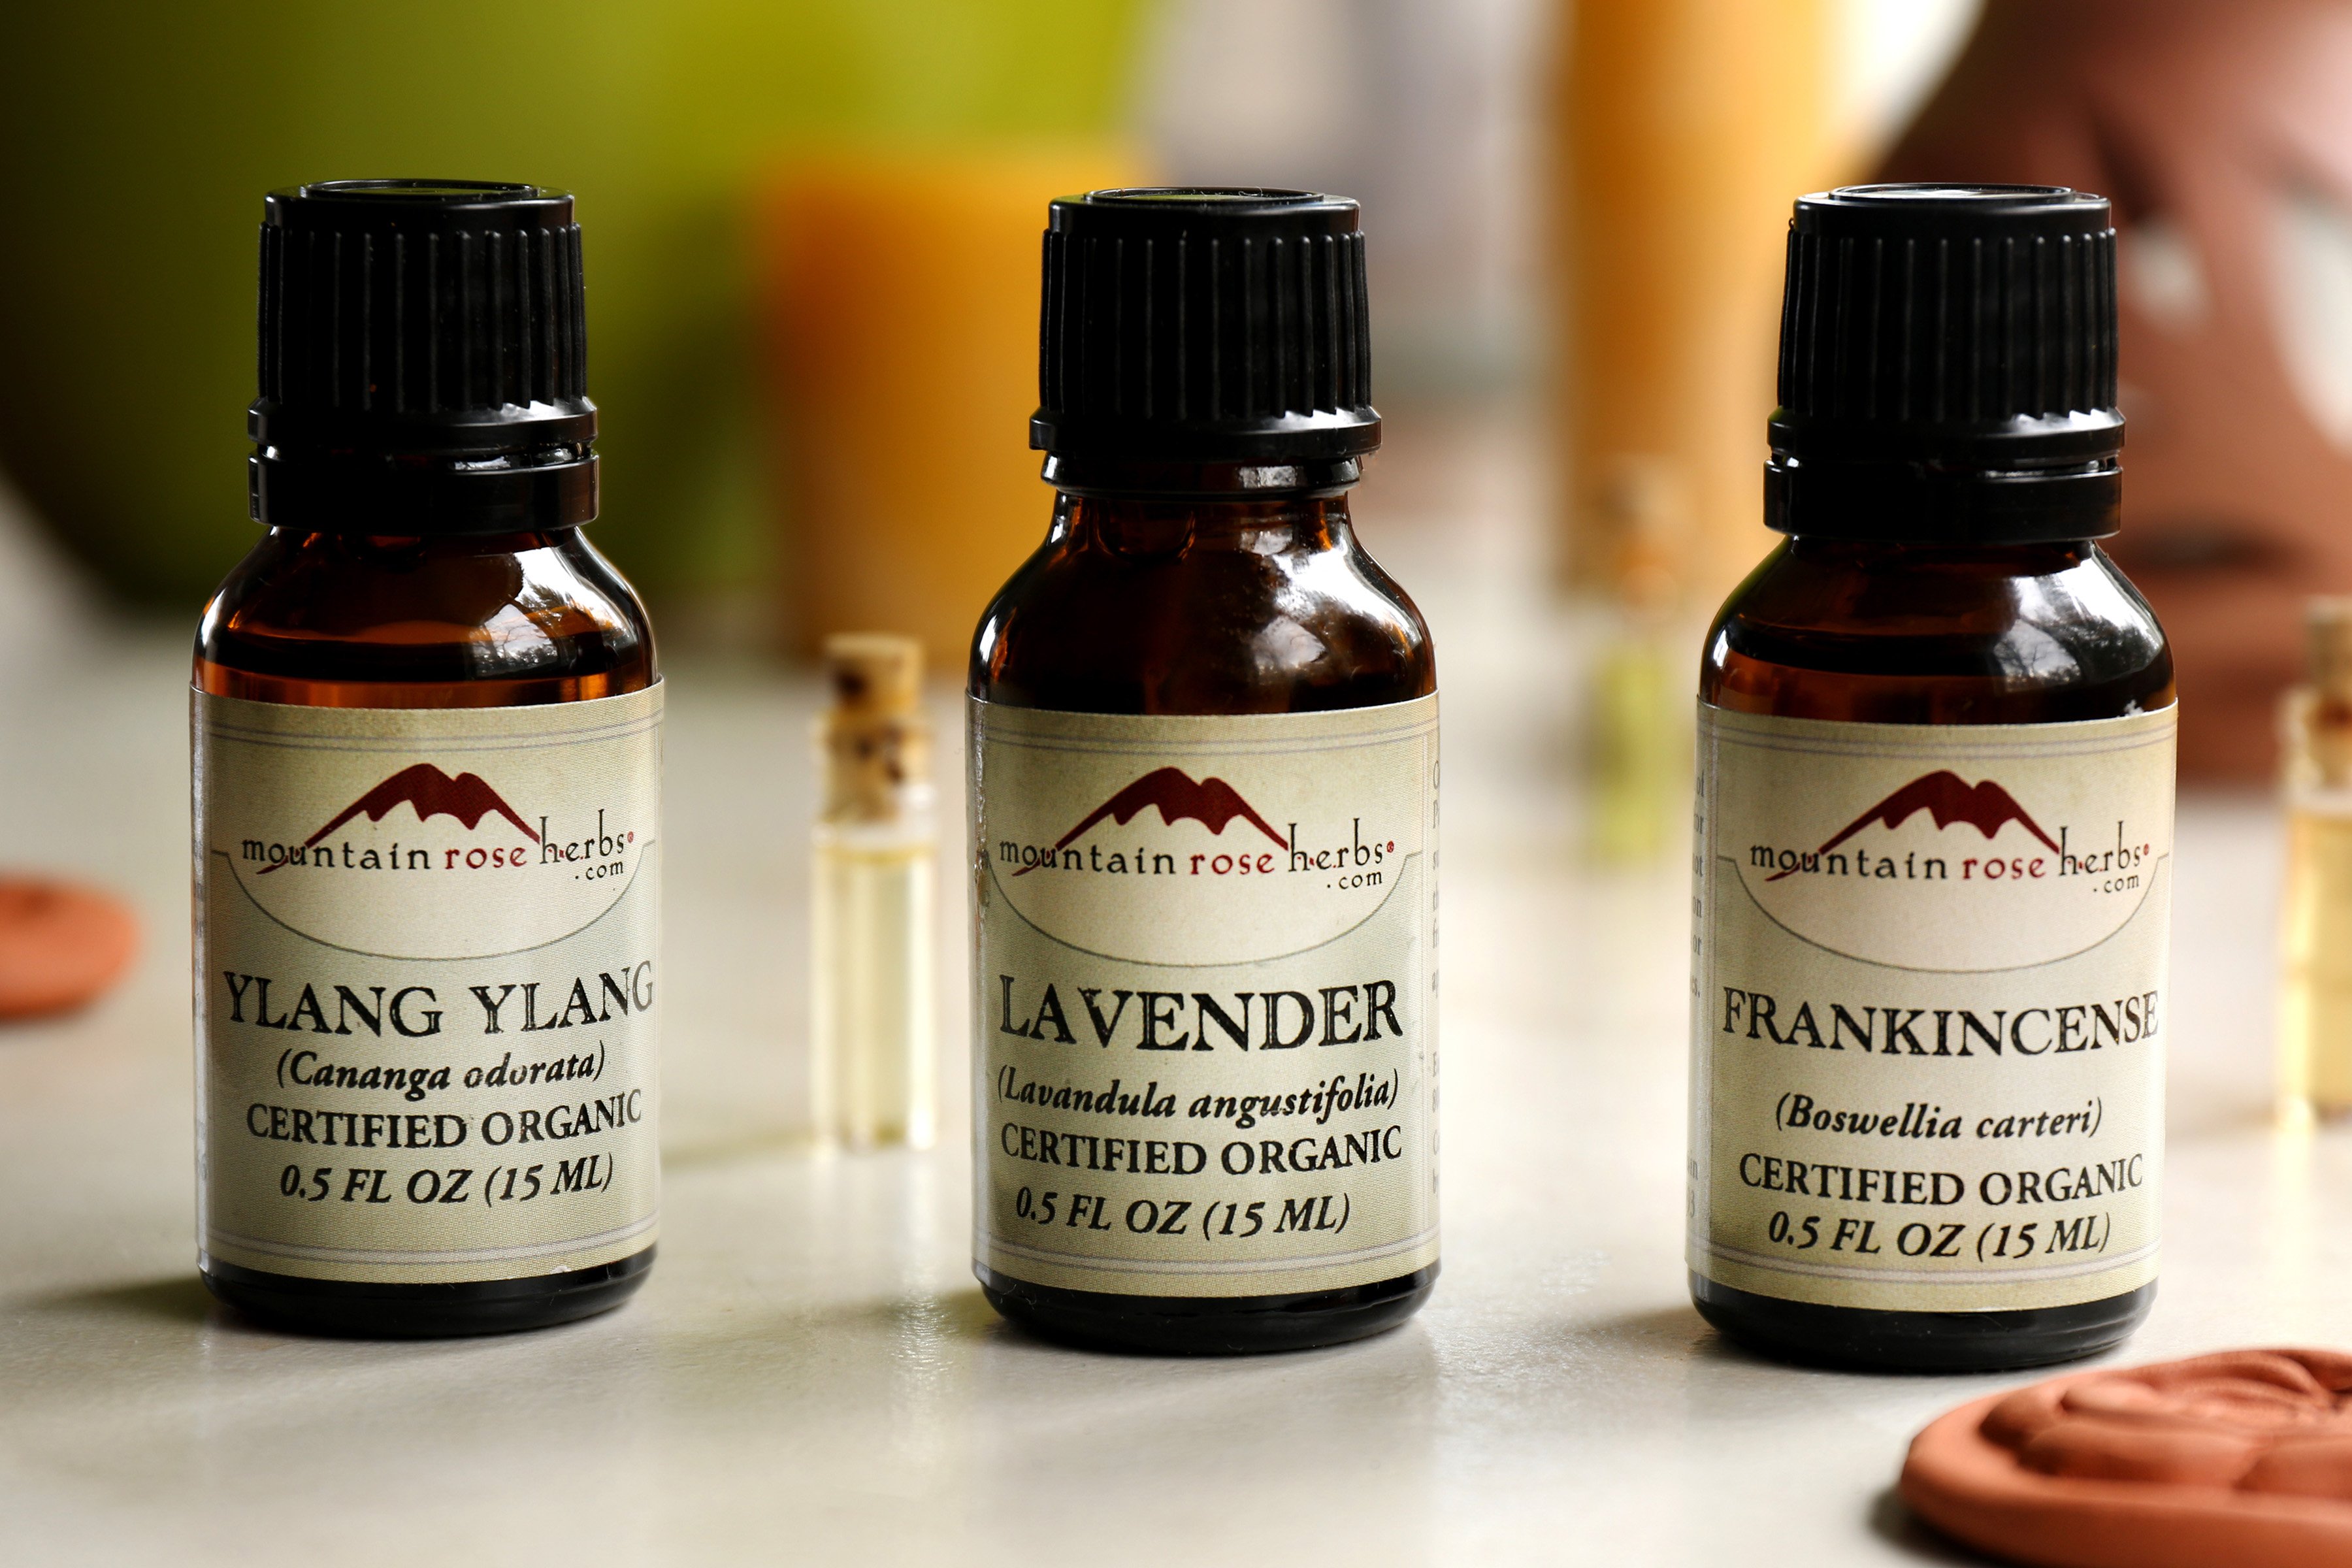 The most popular essential oils offered by Mountain Rose Herbs are organic lavender, organic frankincense, and organic ylang ylang. With varying aromas from floral to earthy, these essential oils bring a sense of calm and support to any home diffuser. 